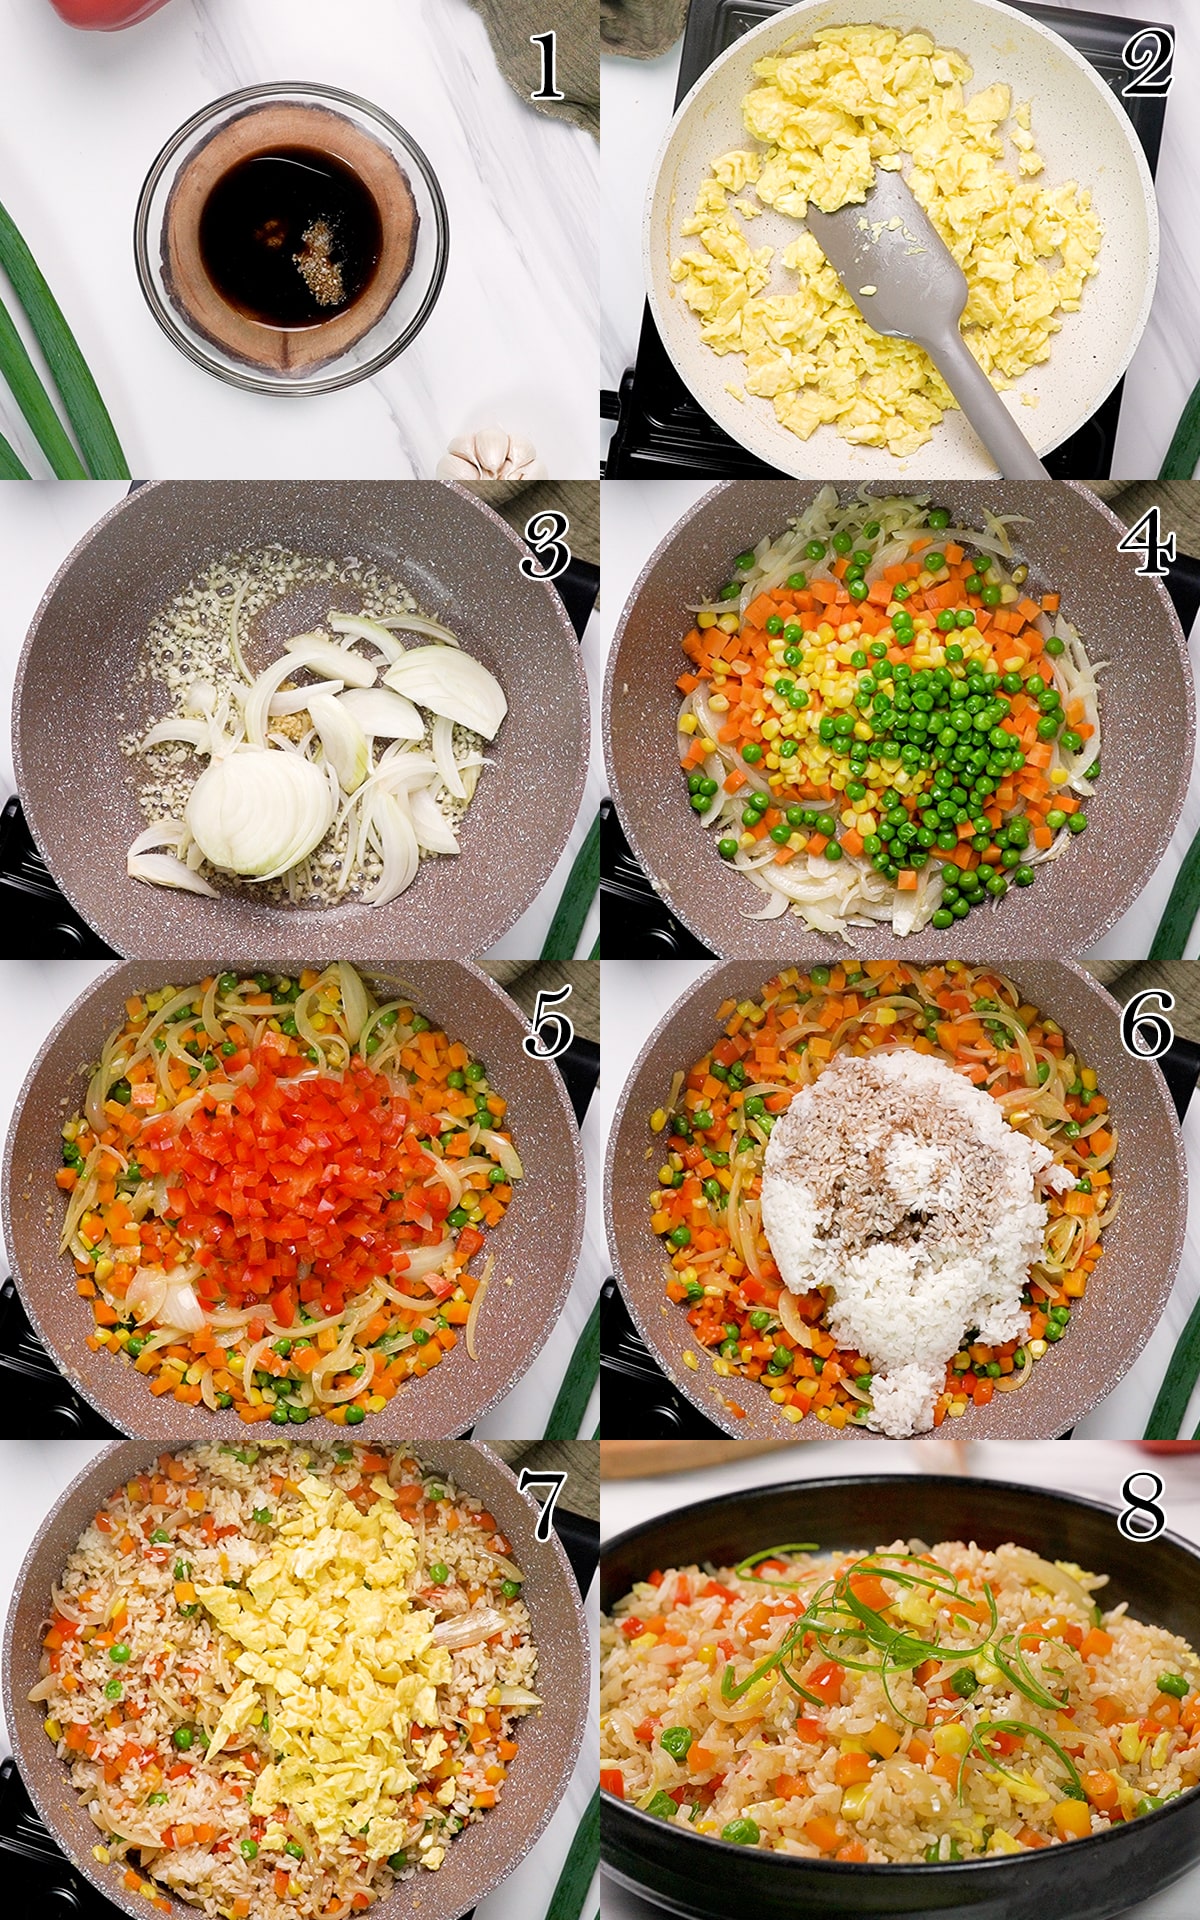 Gluten-free fried rice step by step.